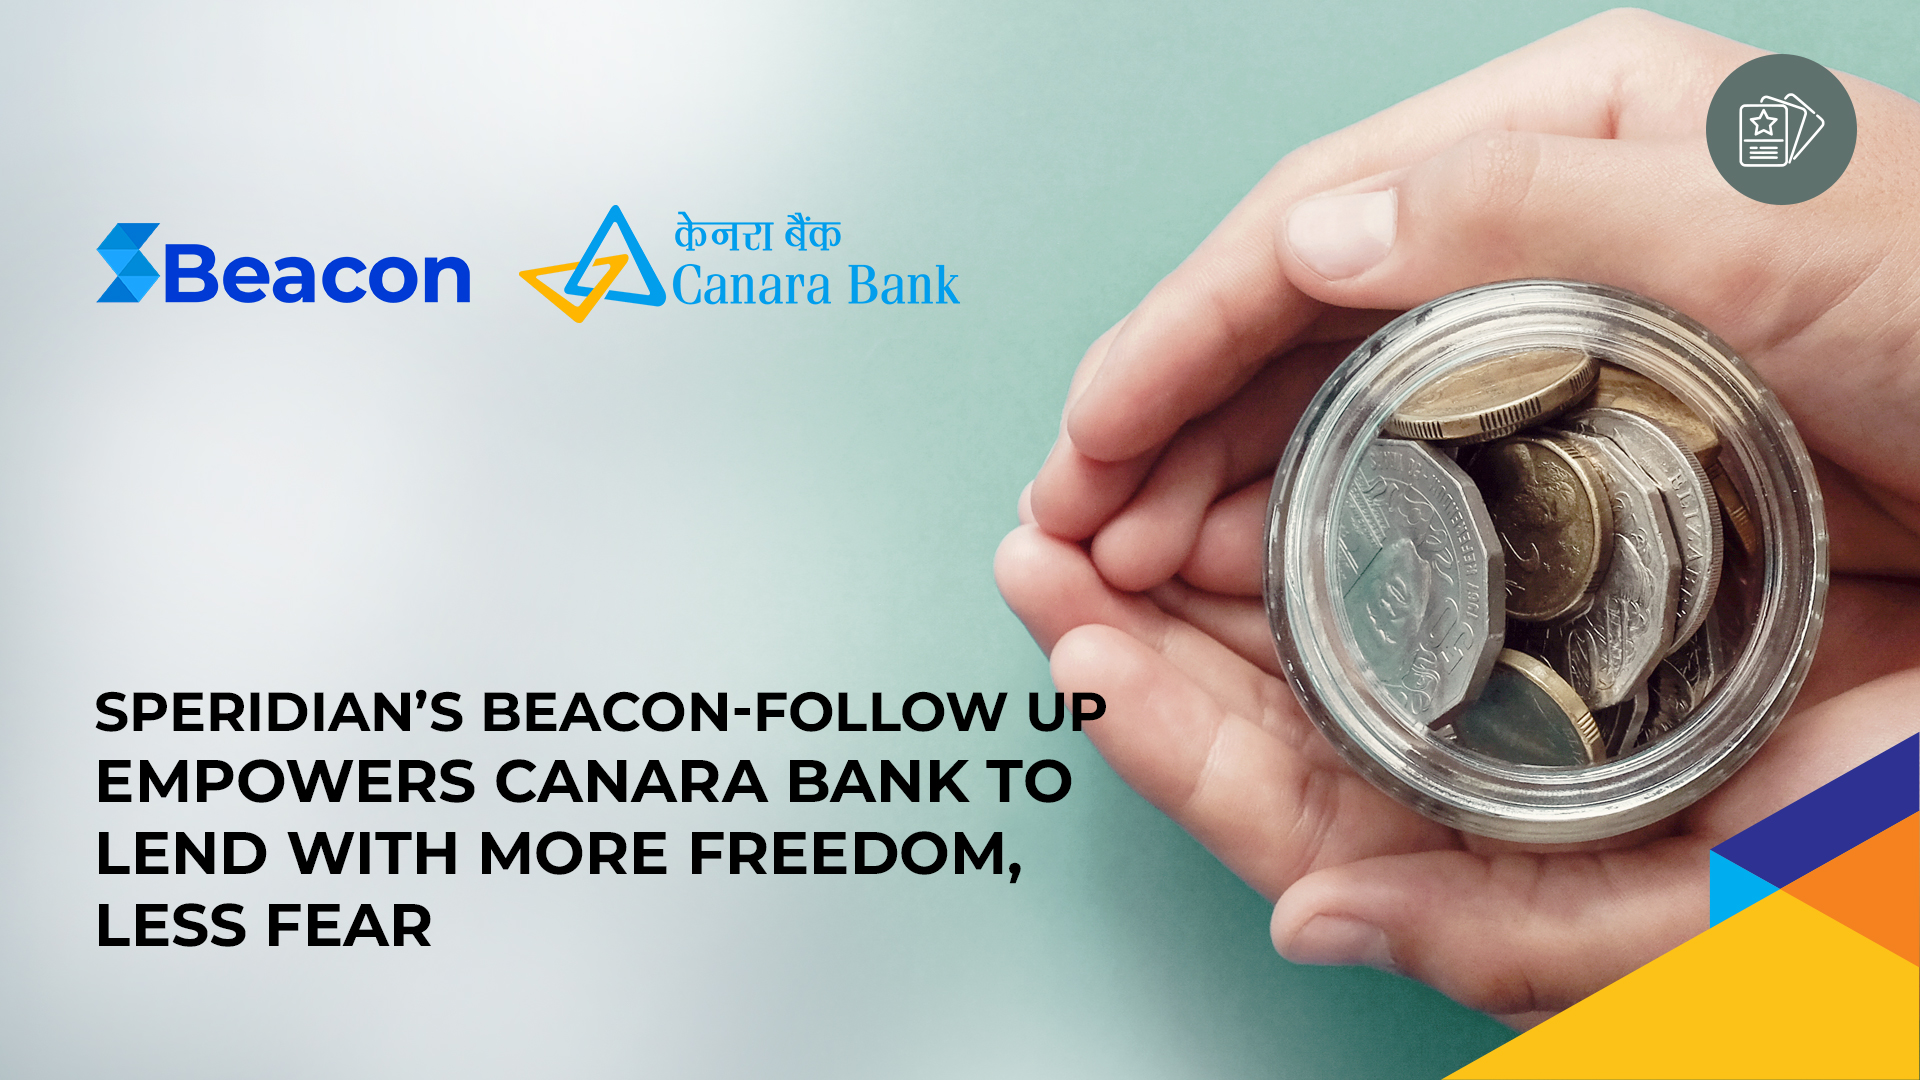 Speridian’s BEACON Follow-Up Empowers Canara Bank to Lend With More Freedom, Less Fear